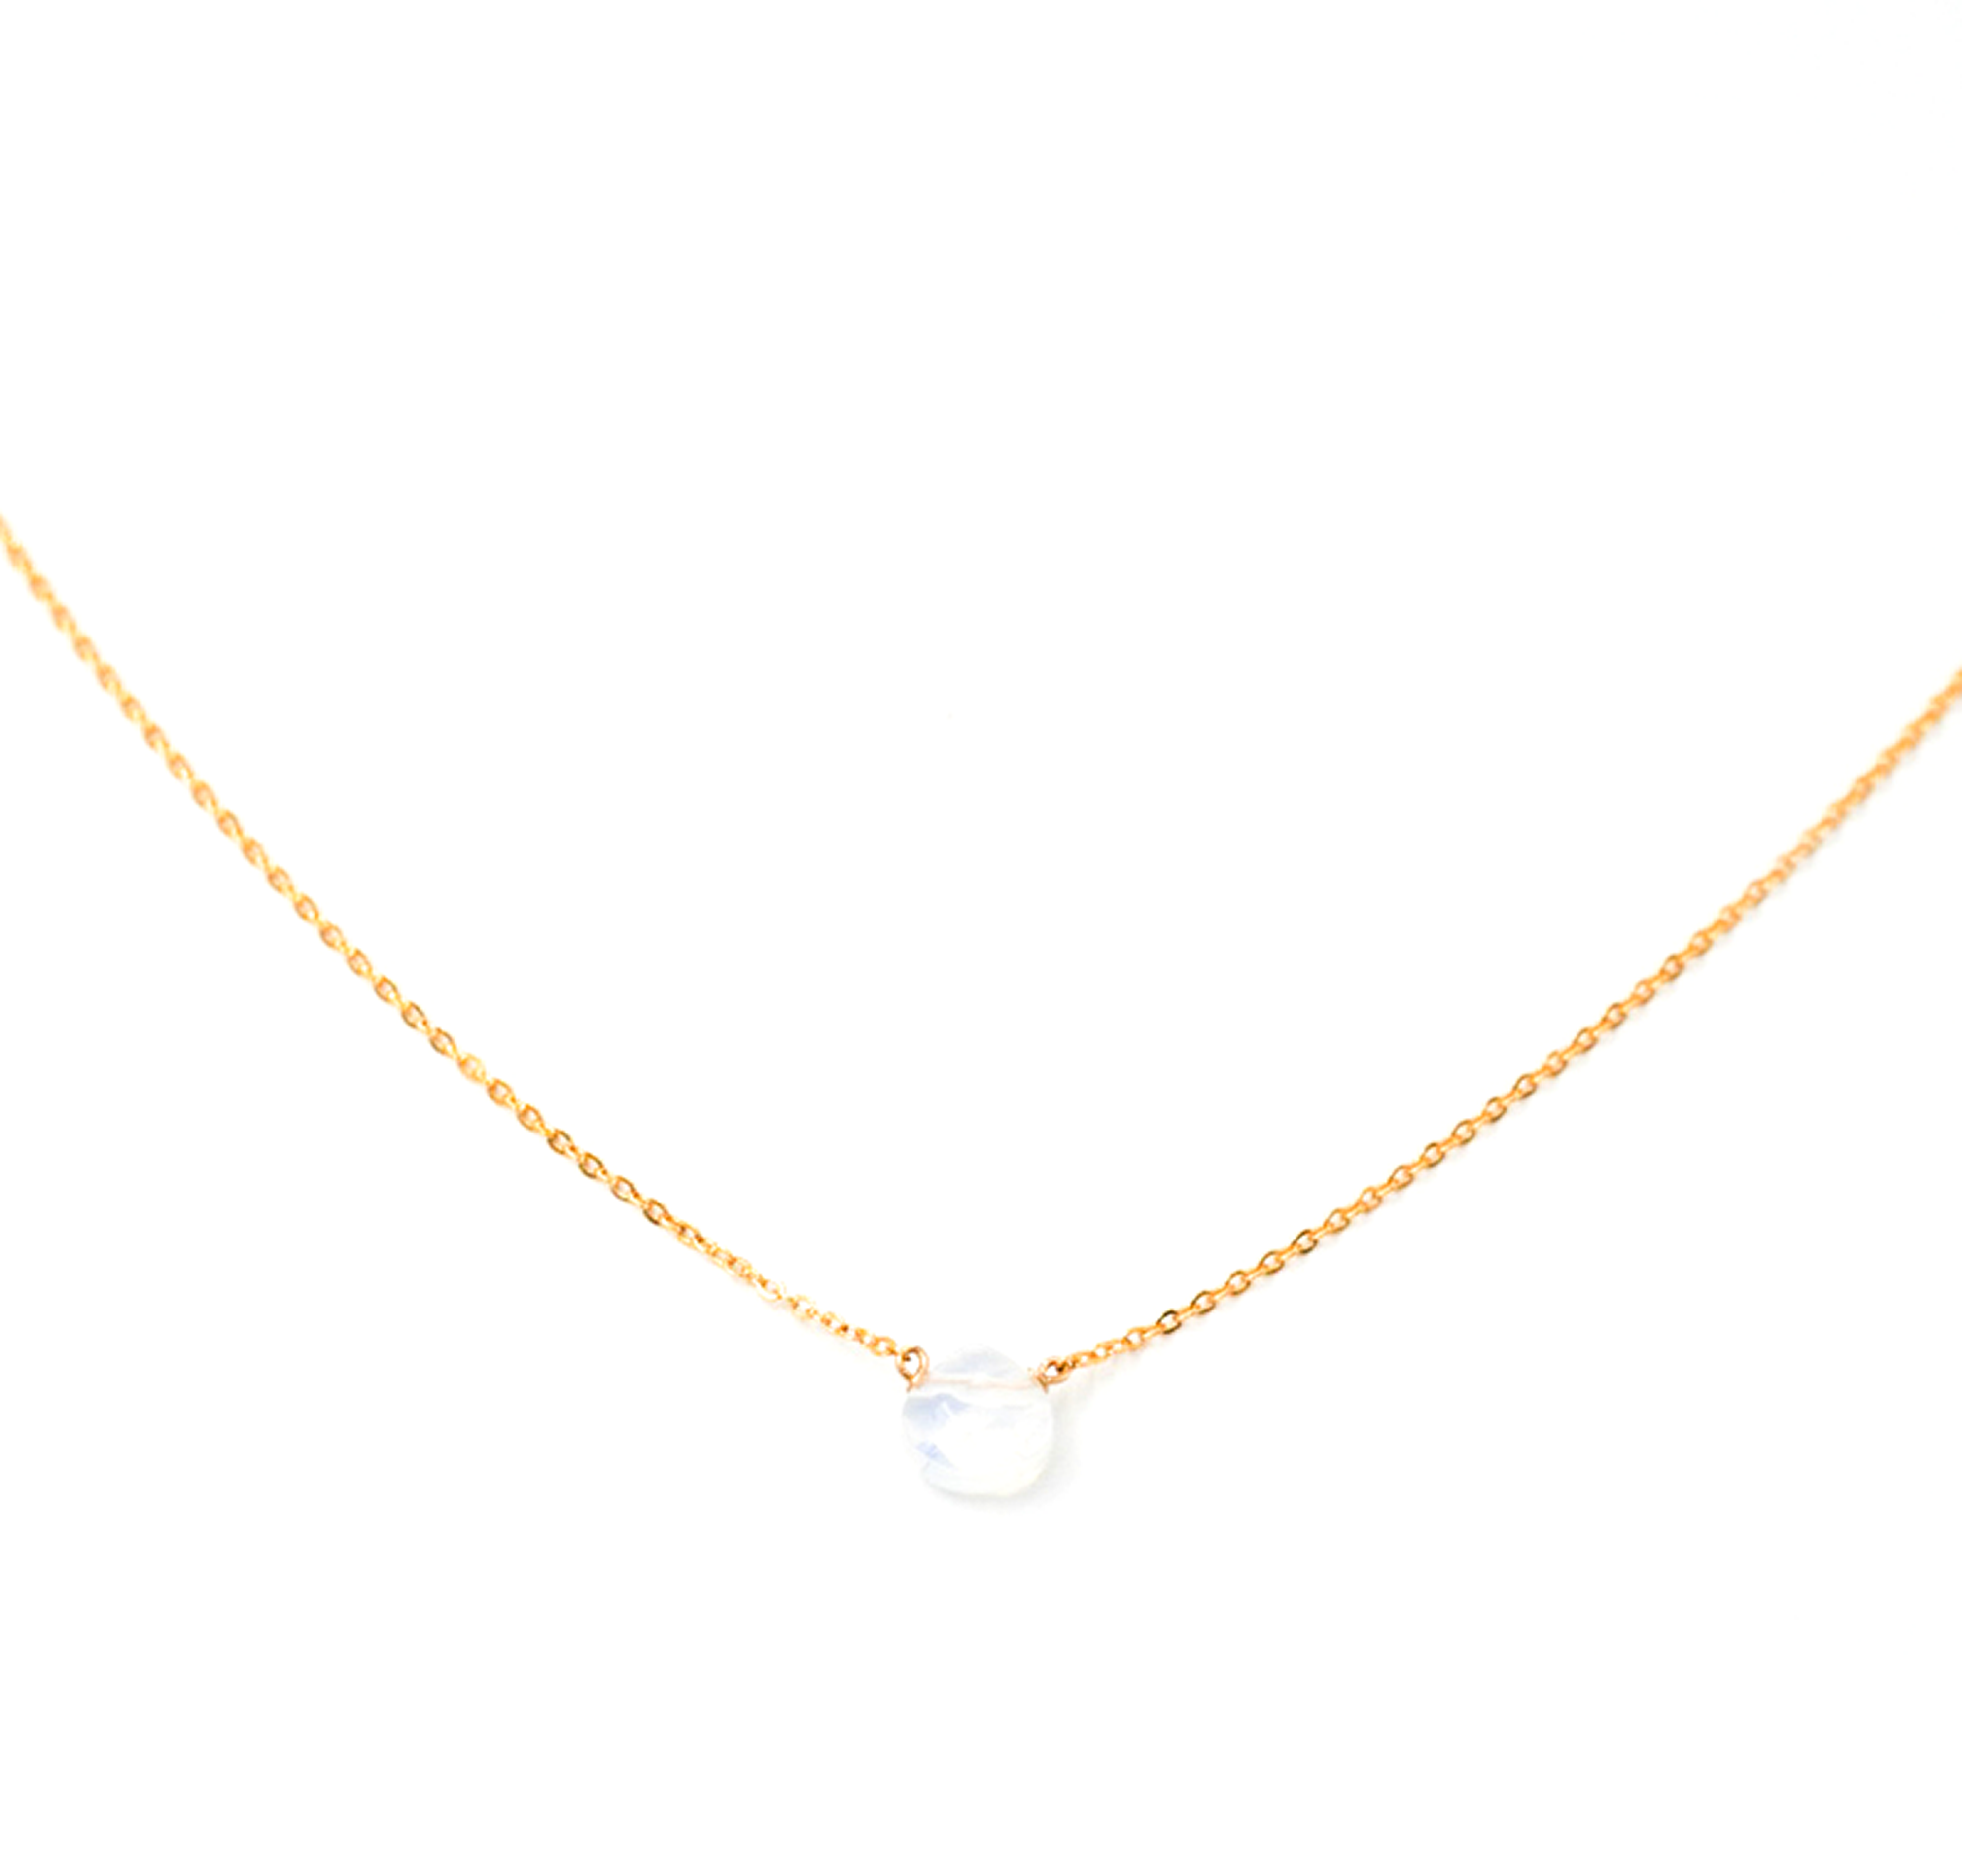 May Martin Opalite Necklace